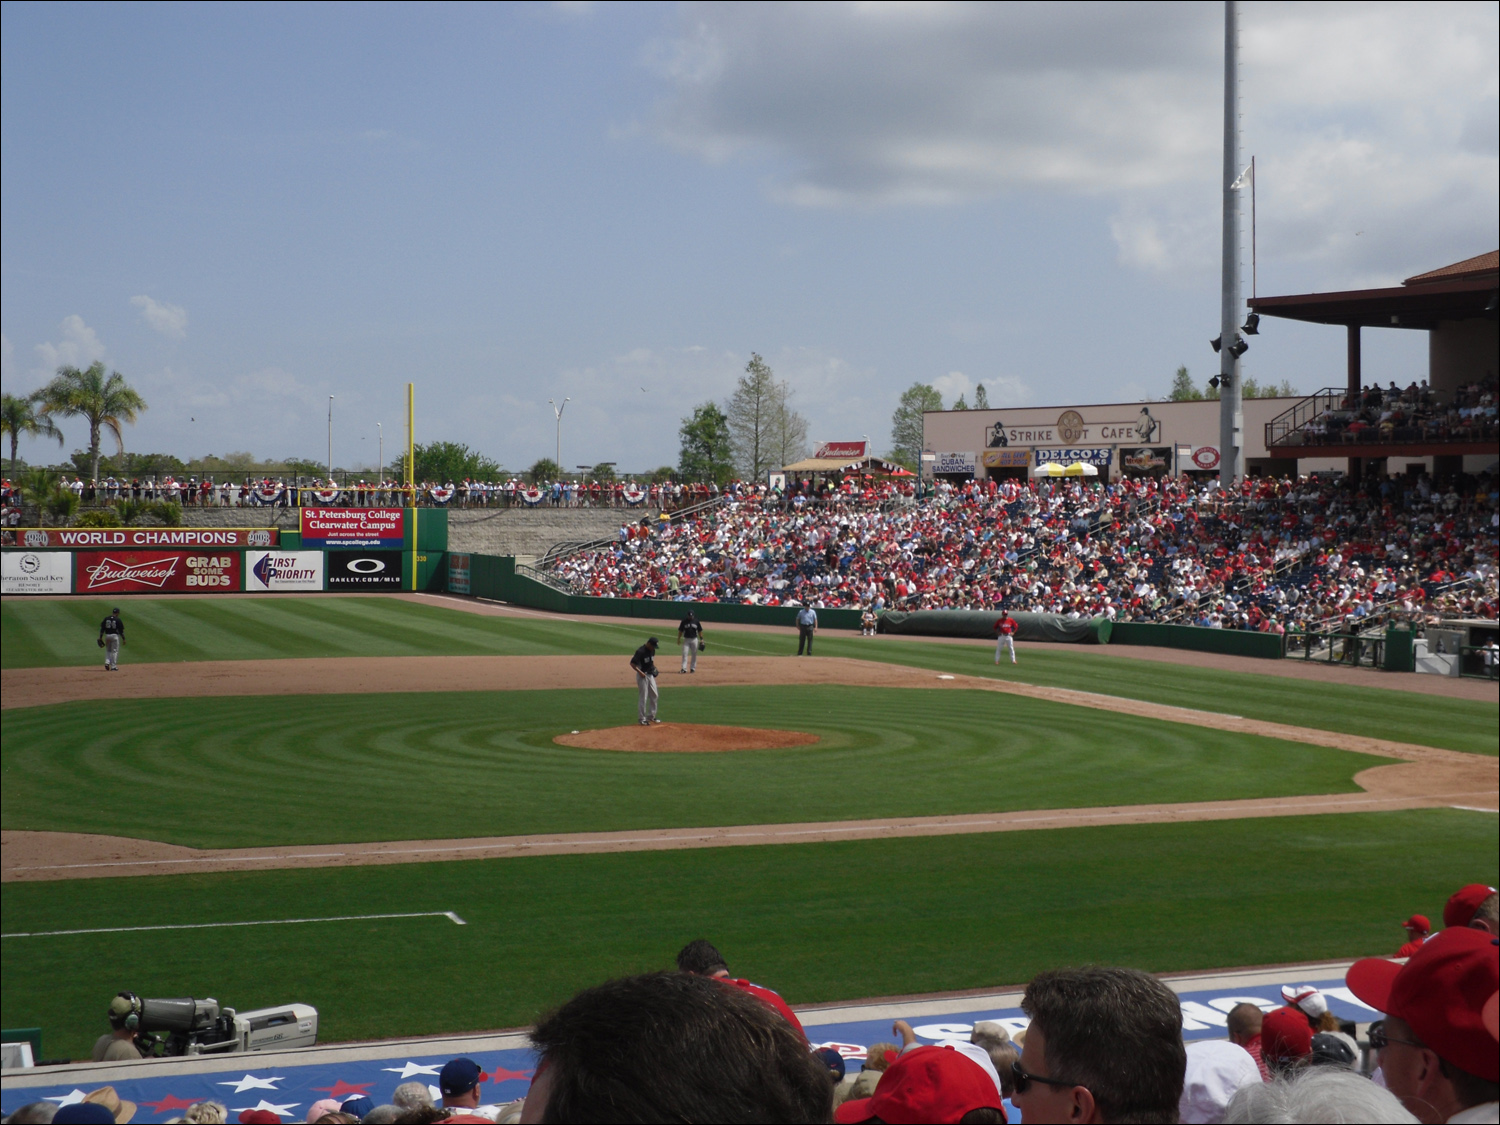 Phillies-Yankees spring training game in Clearwater, FL